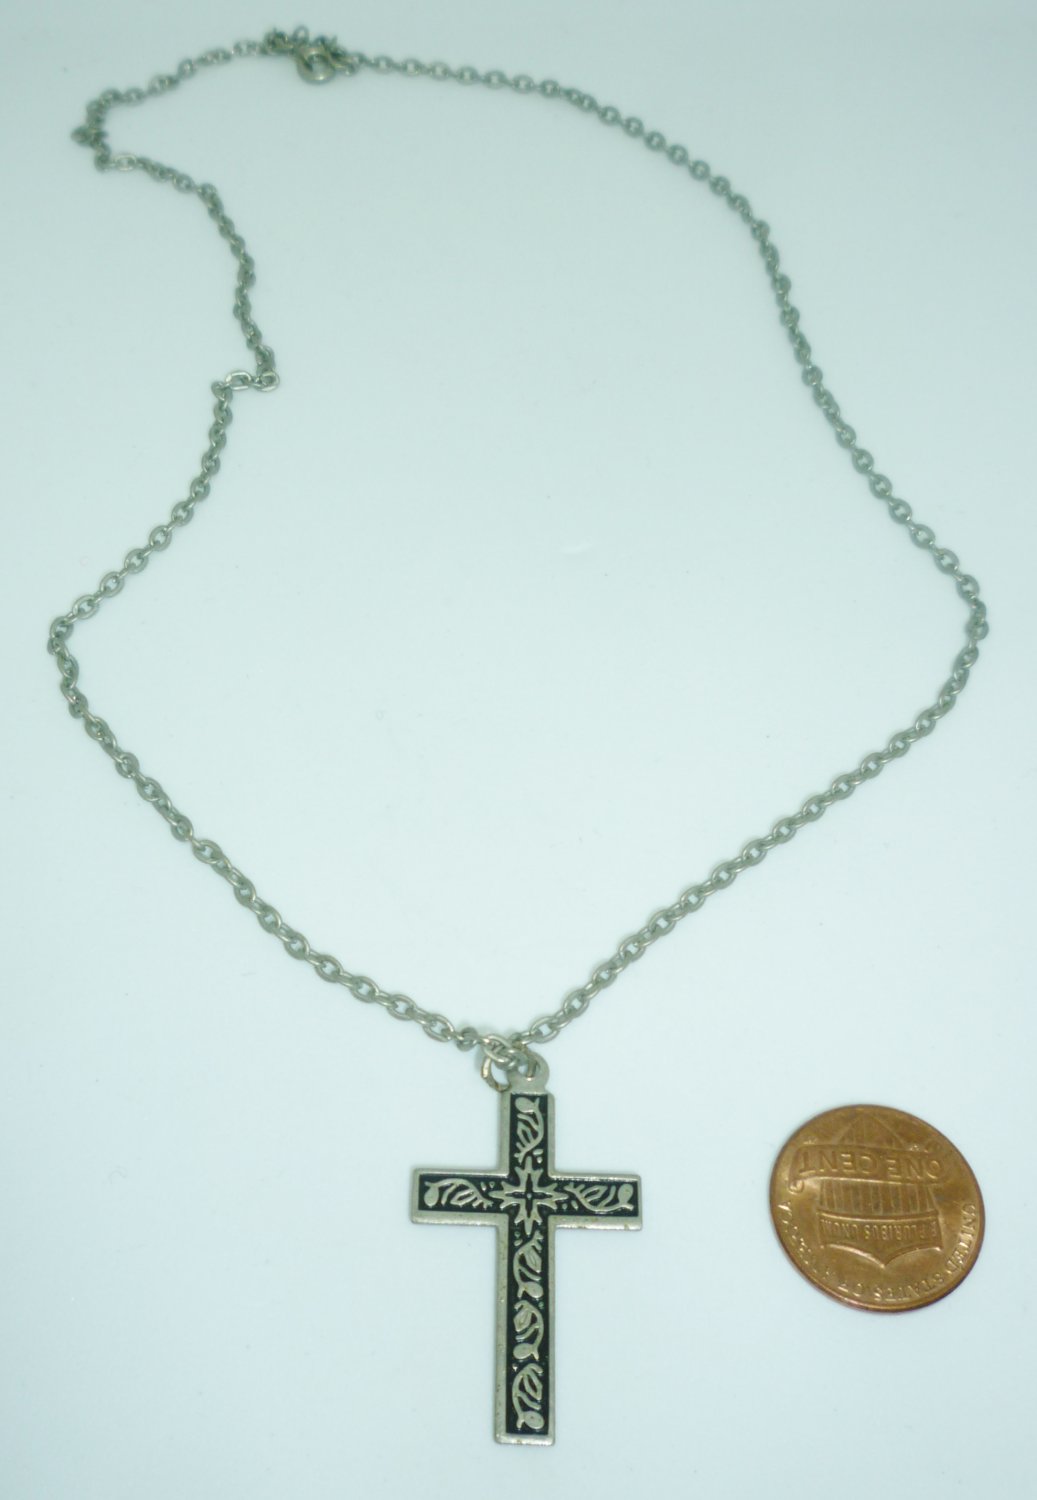 BEAUTIFUL EMBOSSED METAL CRUCIFIX ON A CHAIN CHRISTIANITY